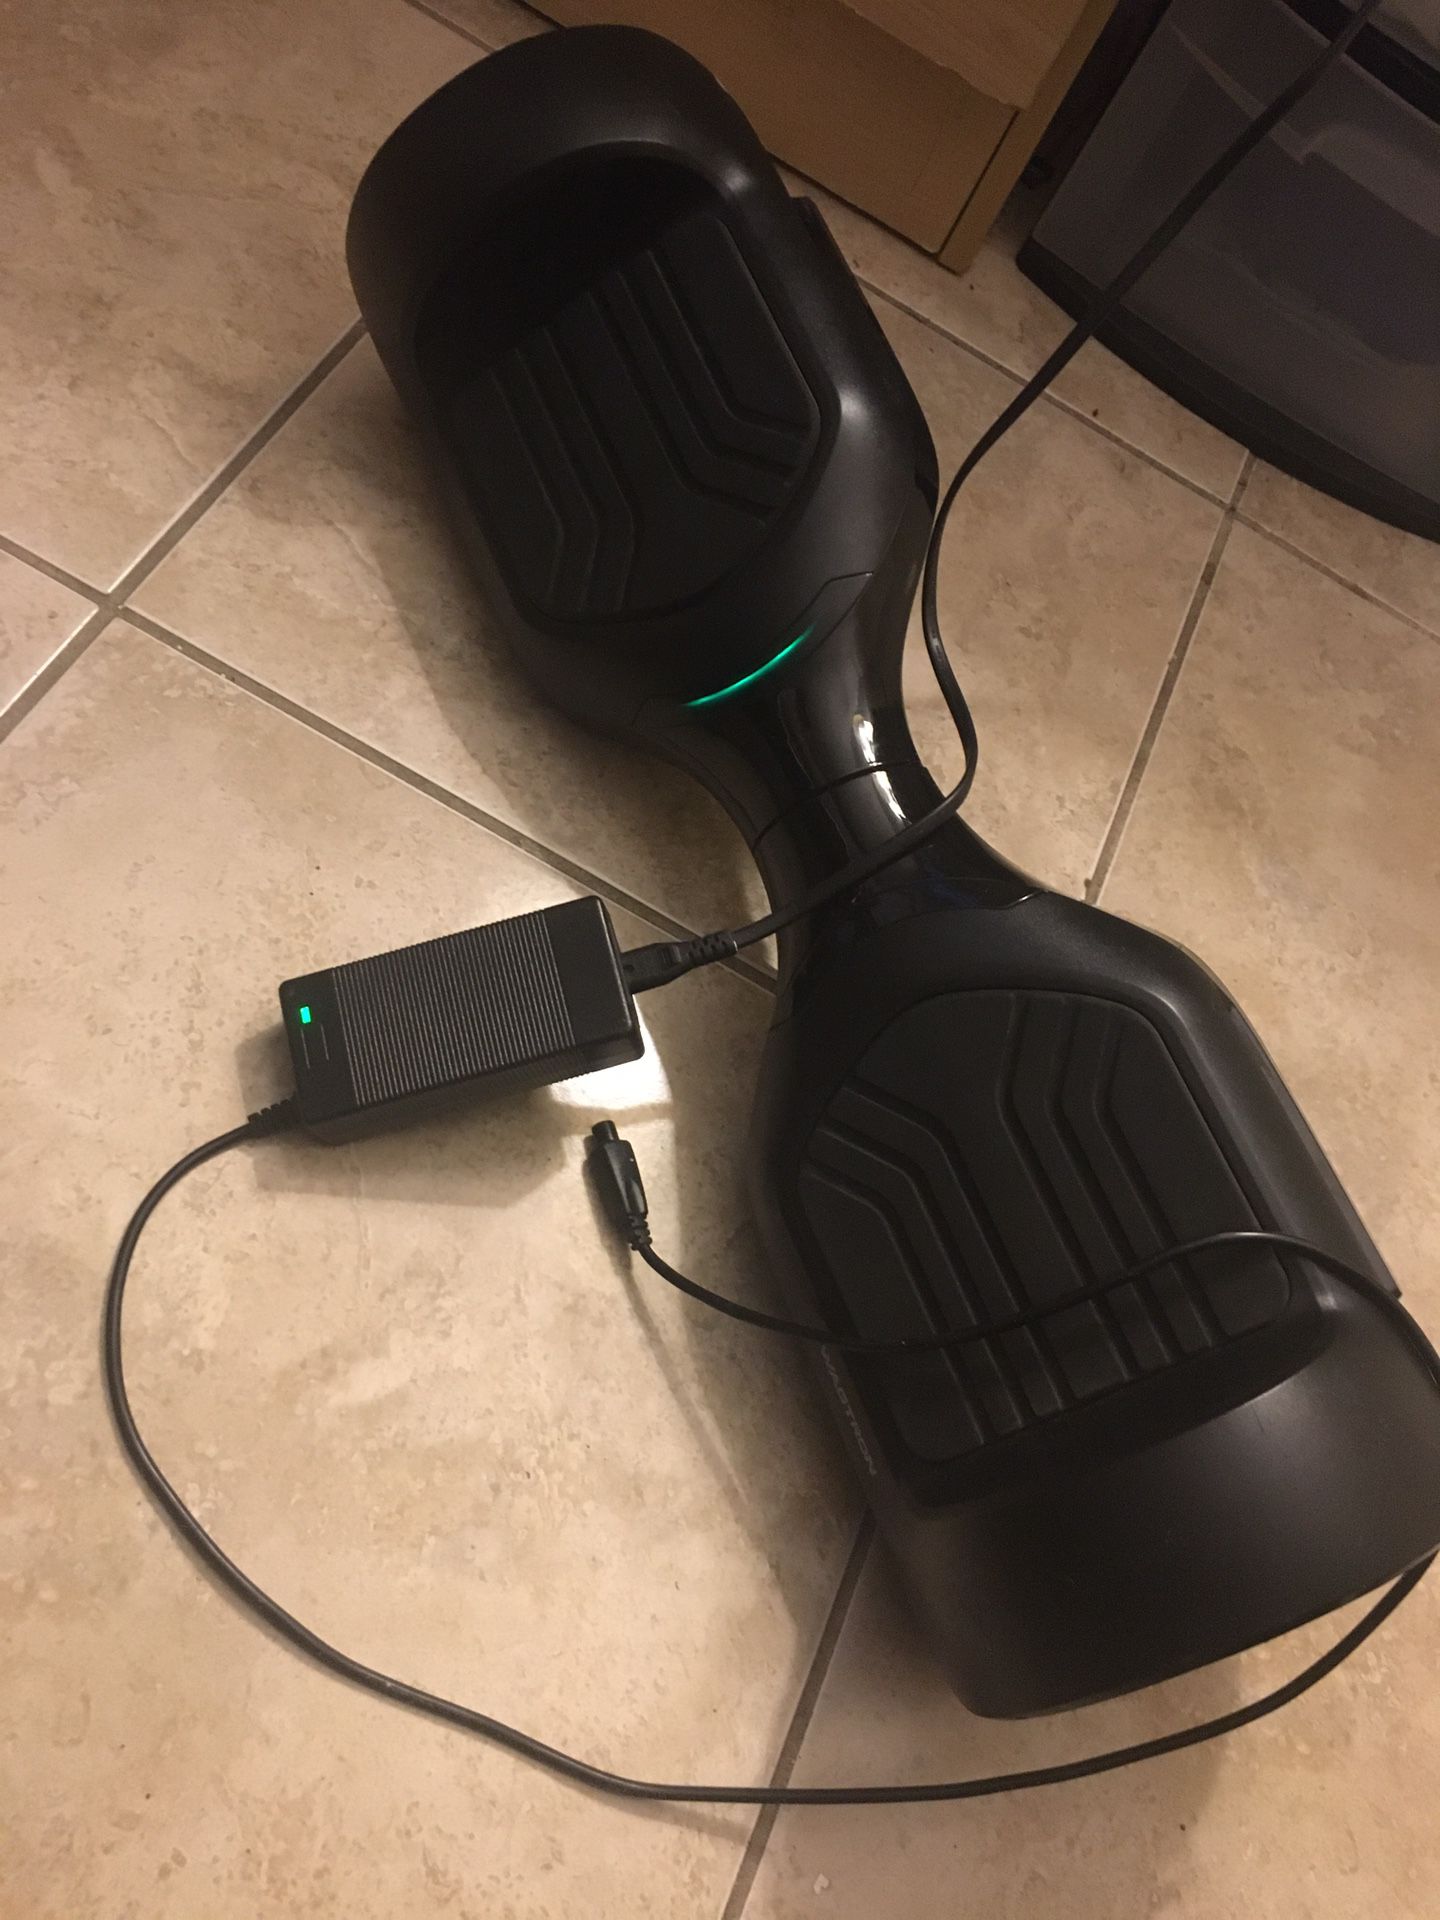 Swagtron T580 Hoverboard fully working